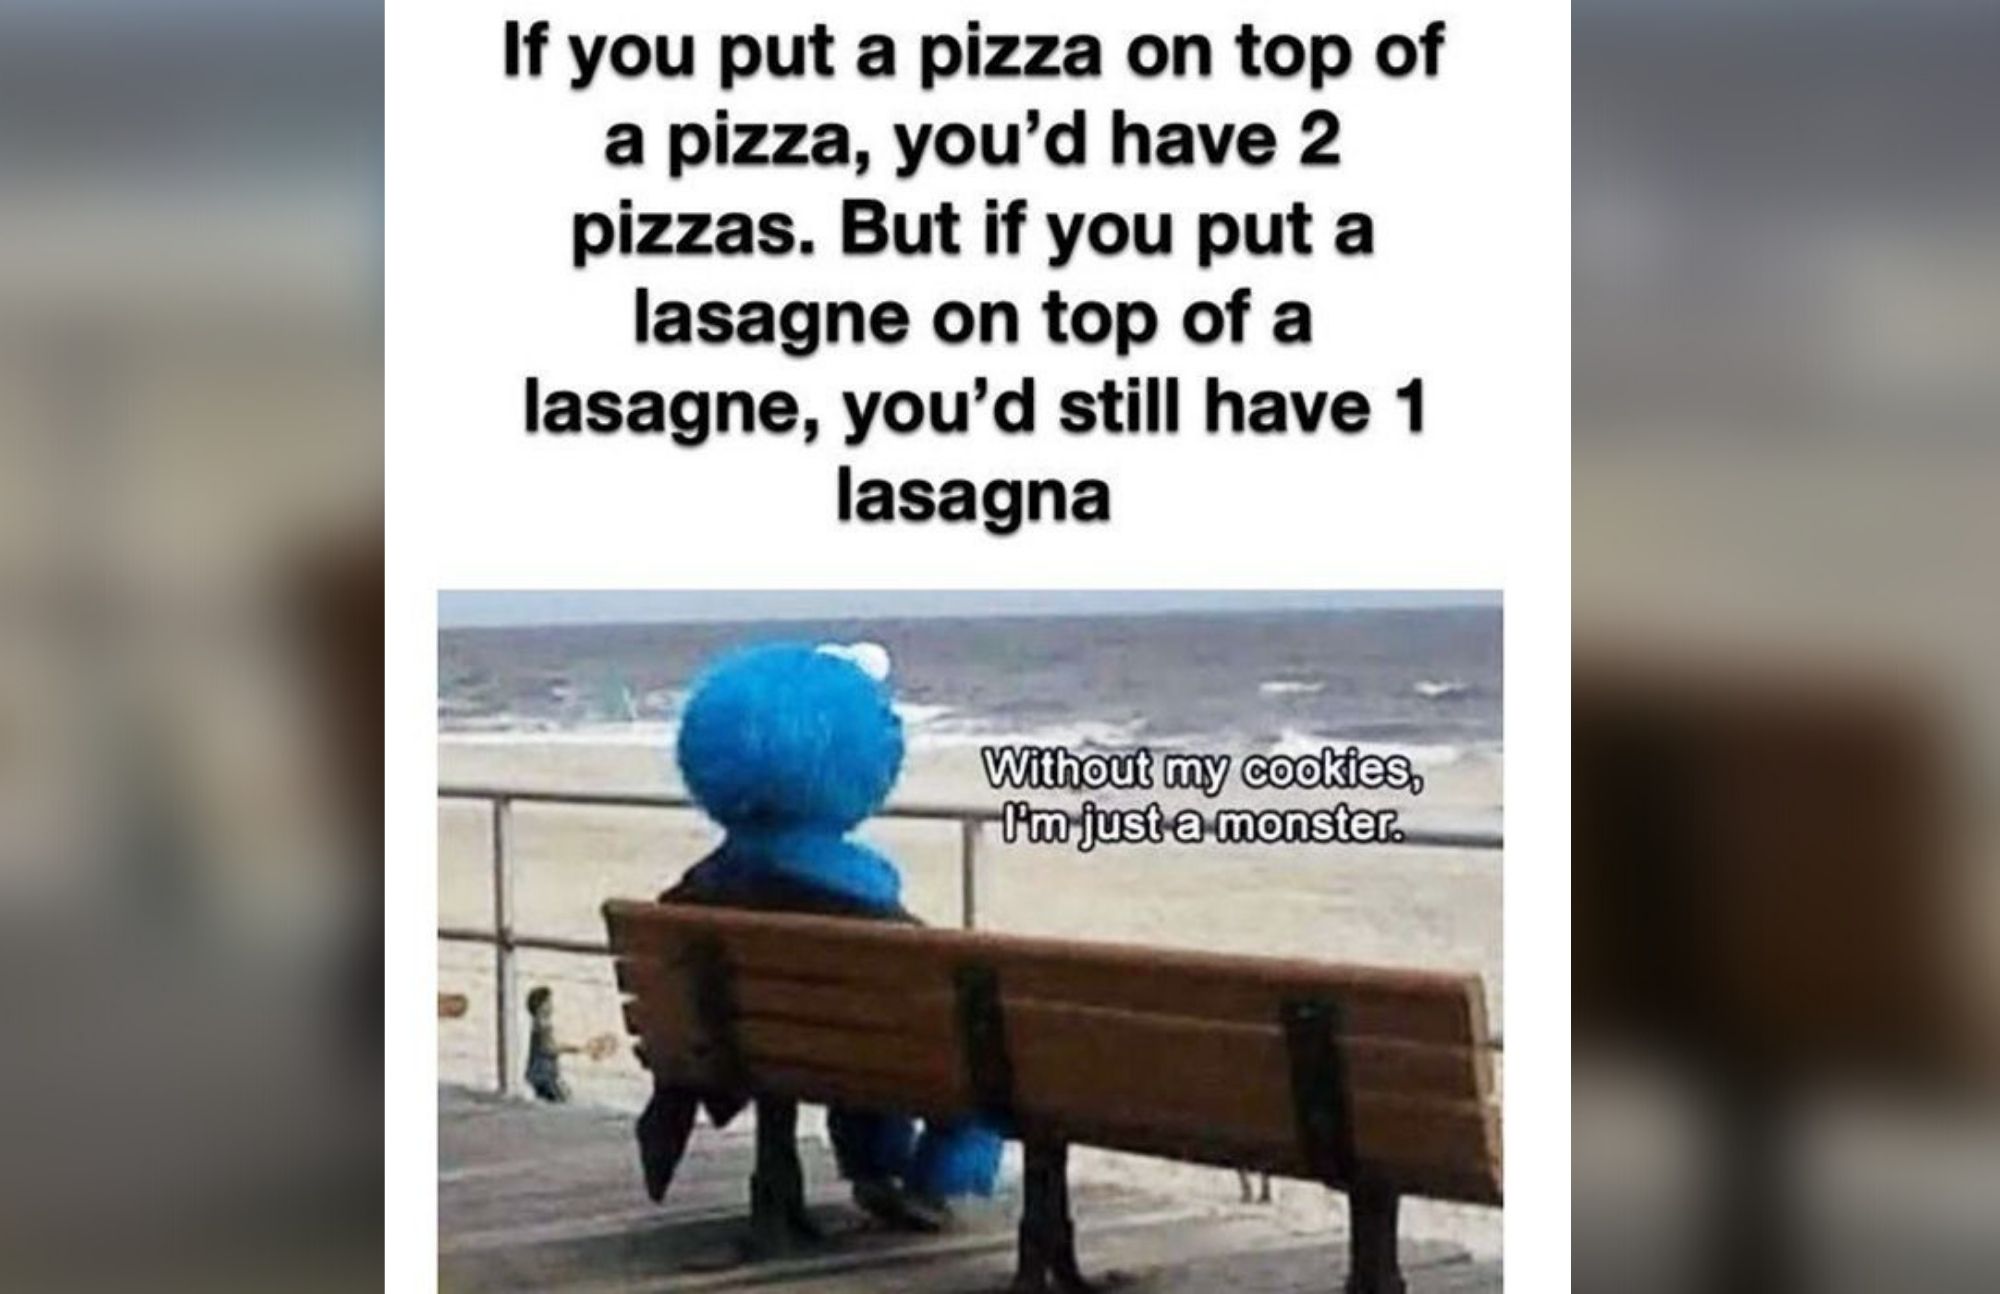 A blue muppet sitting and has a long statements in the upper part mentioning pizza and lasagne